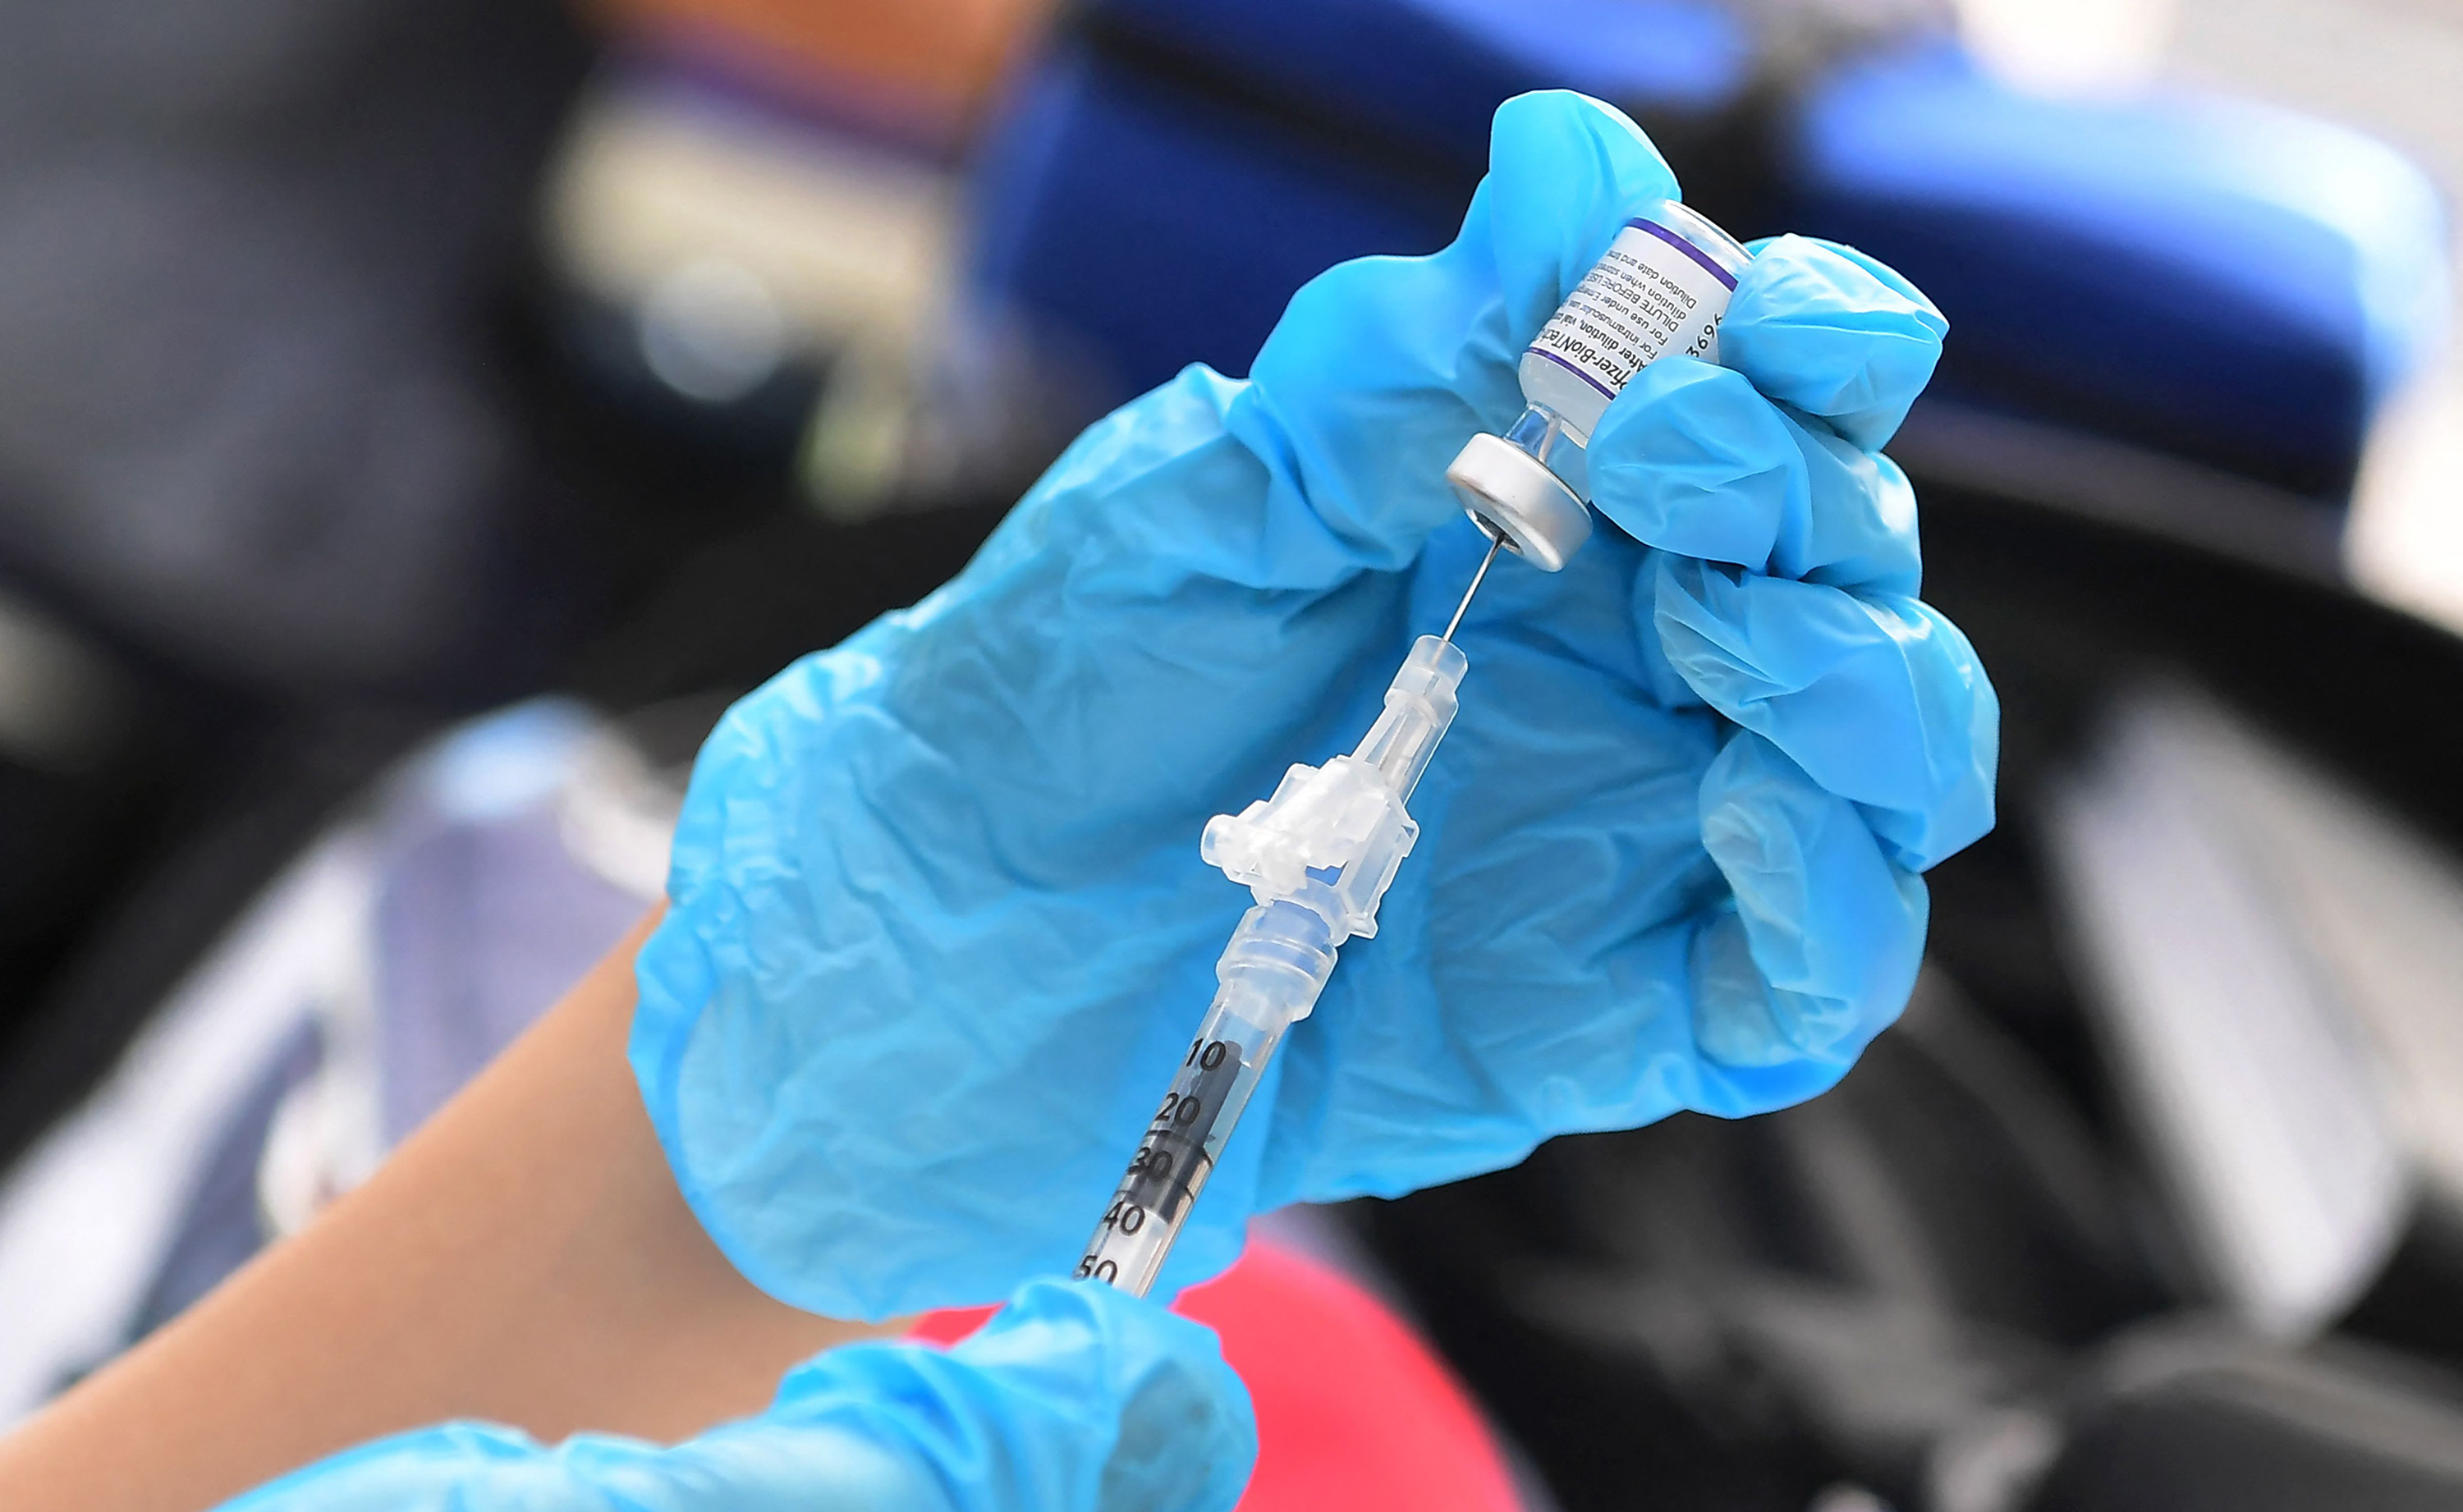 A Pfizer Covid-19 vaccine is prepared for administration at a vaccination clinic on September 22 in Los Angeles.